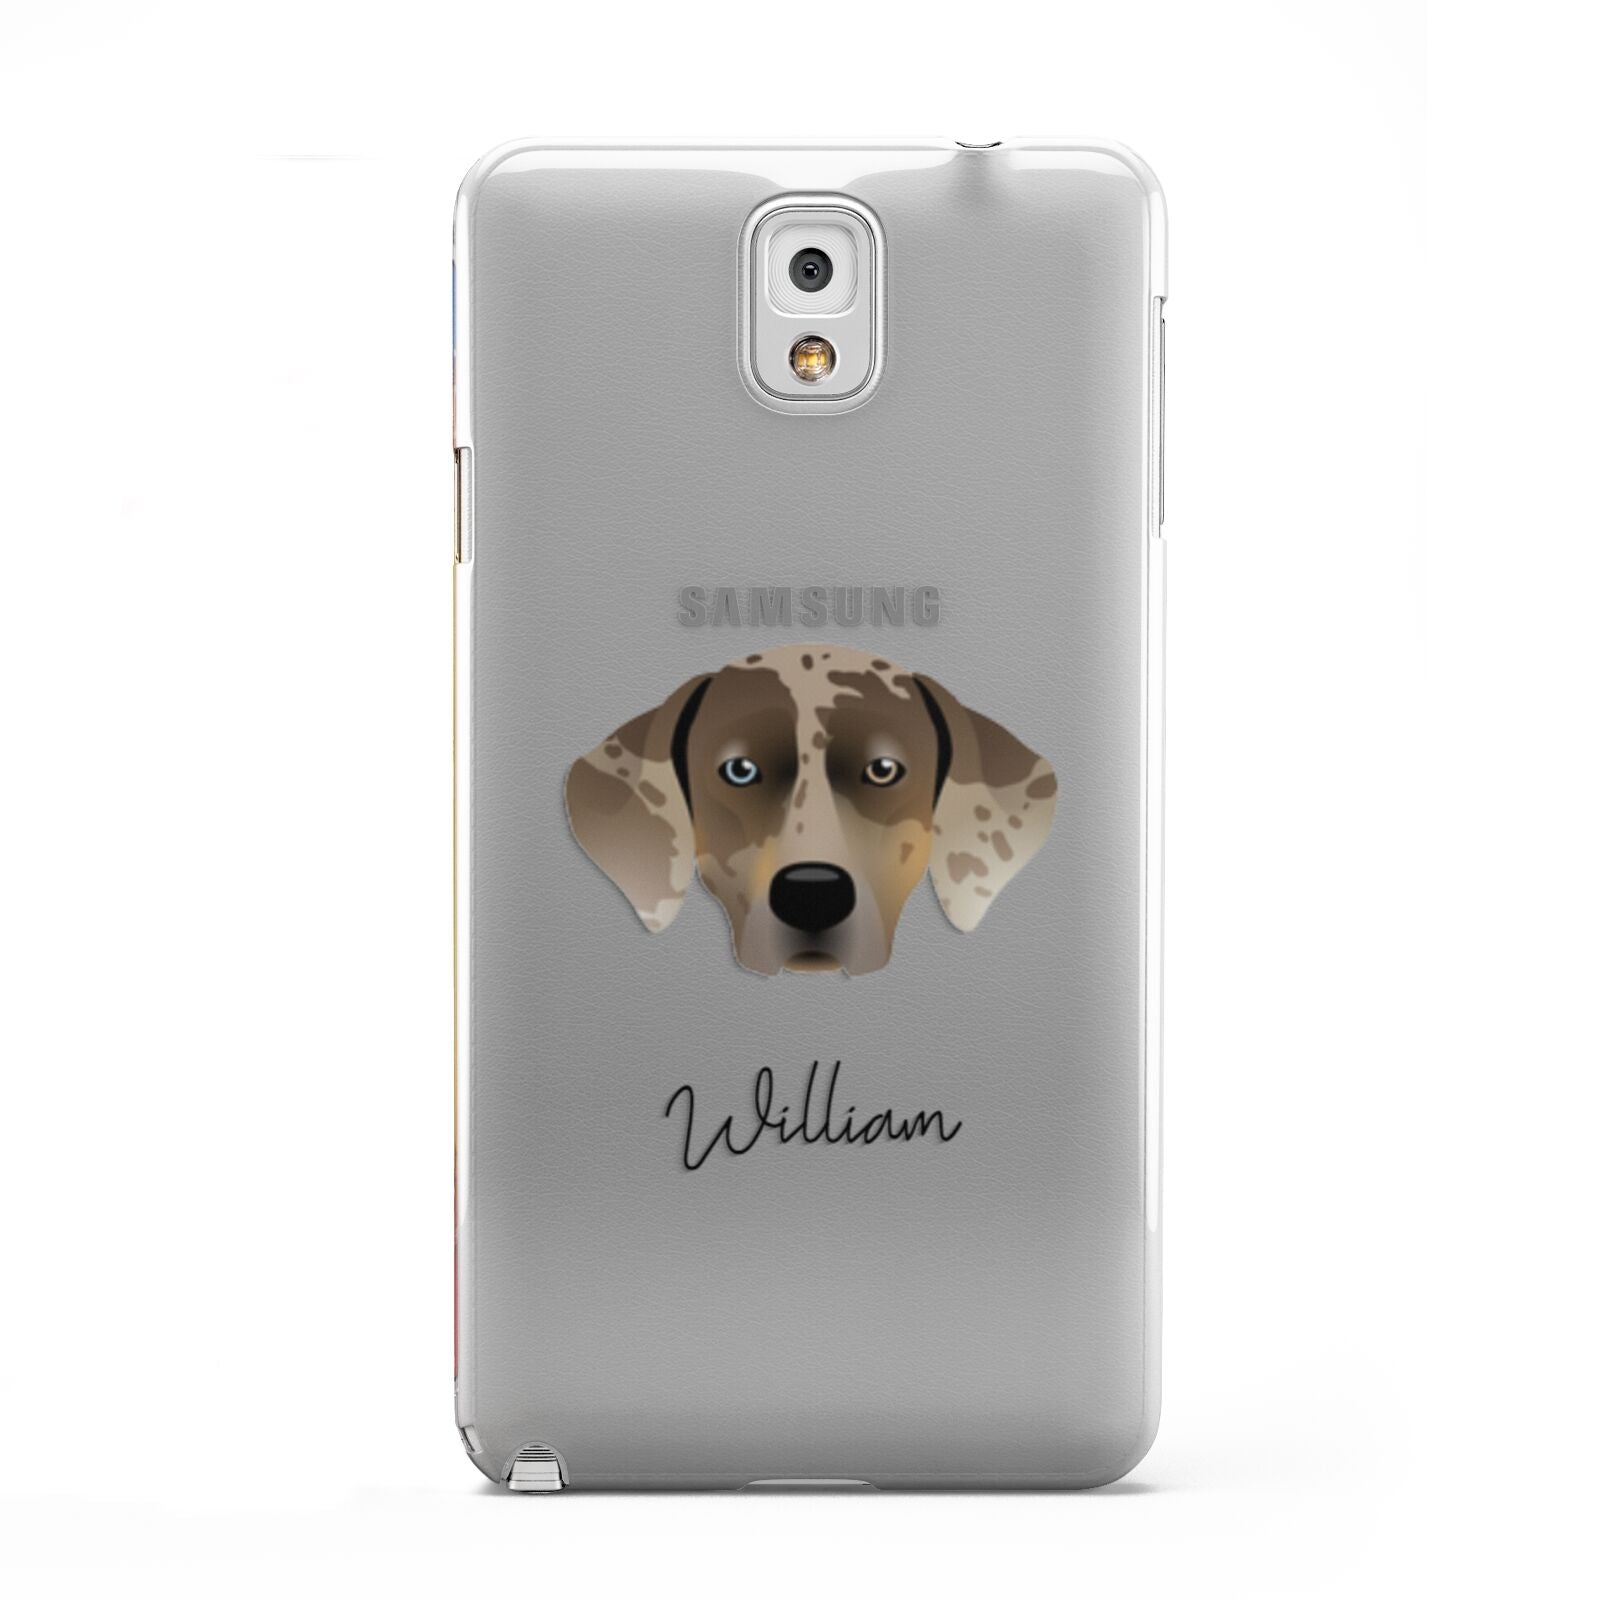 Catahoula Leopard Dog Personalised Samsung Galaxy Note 3 Case